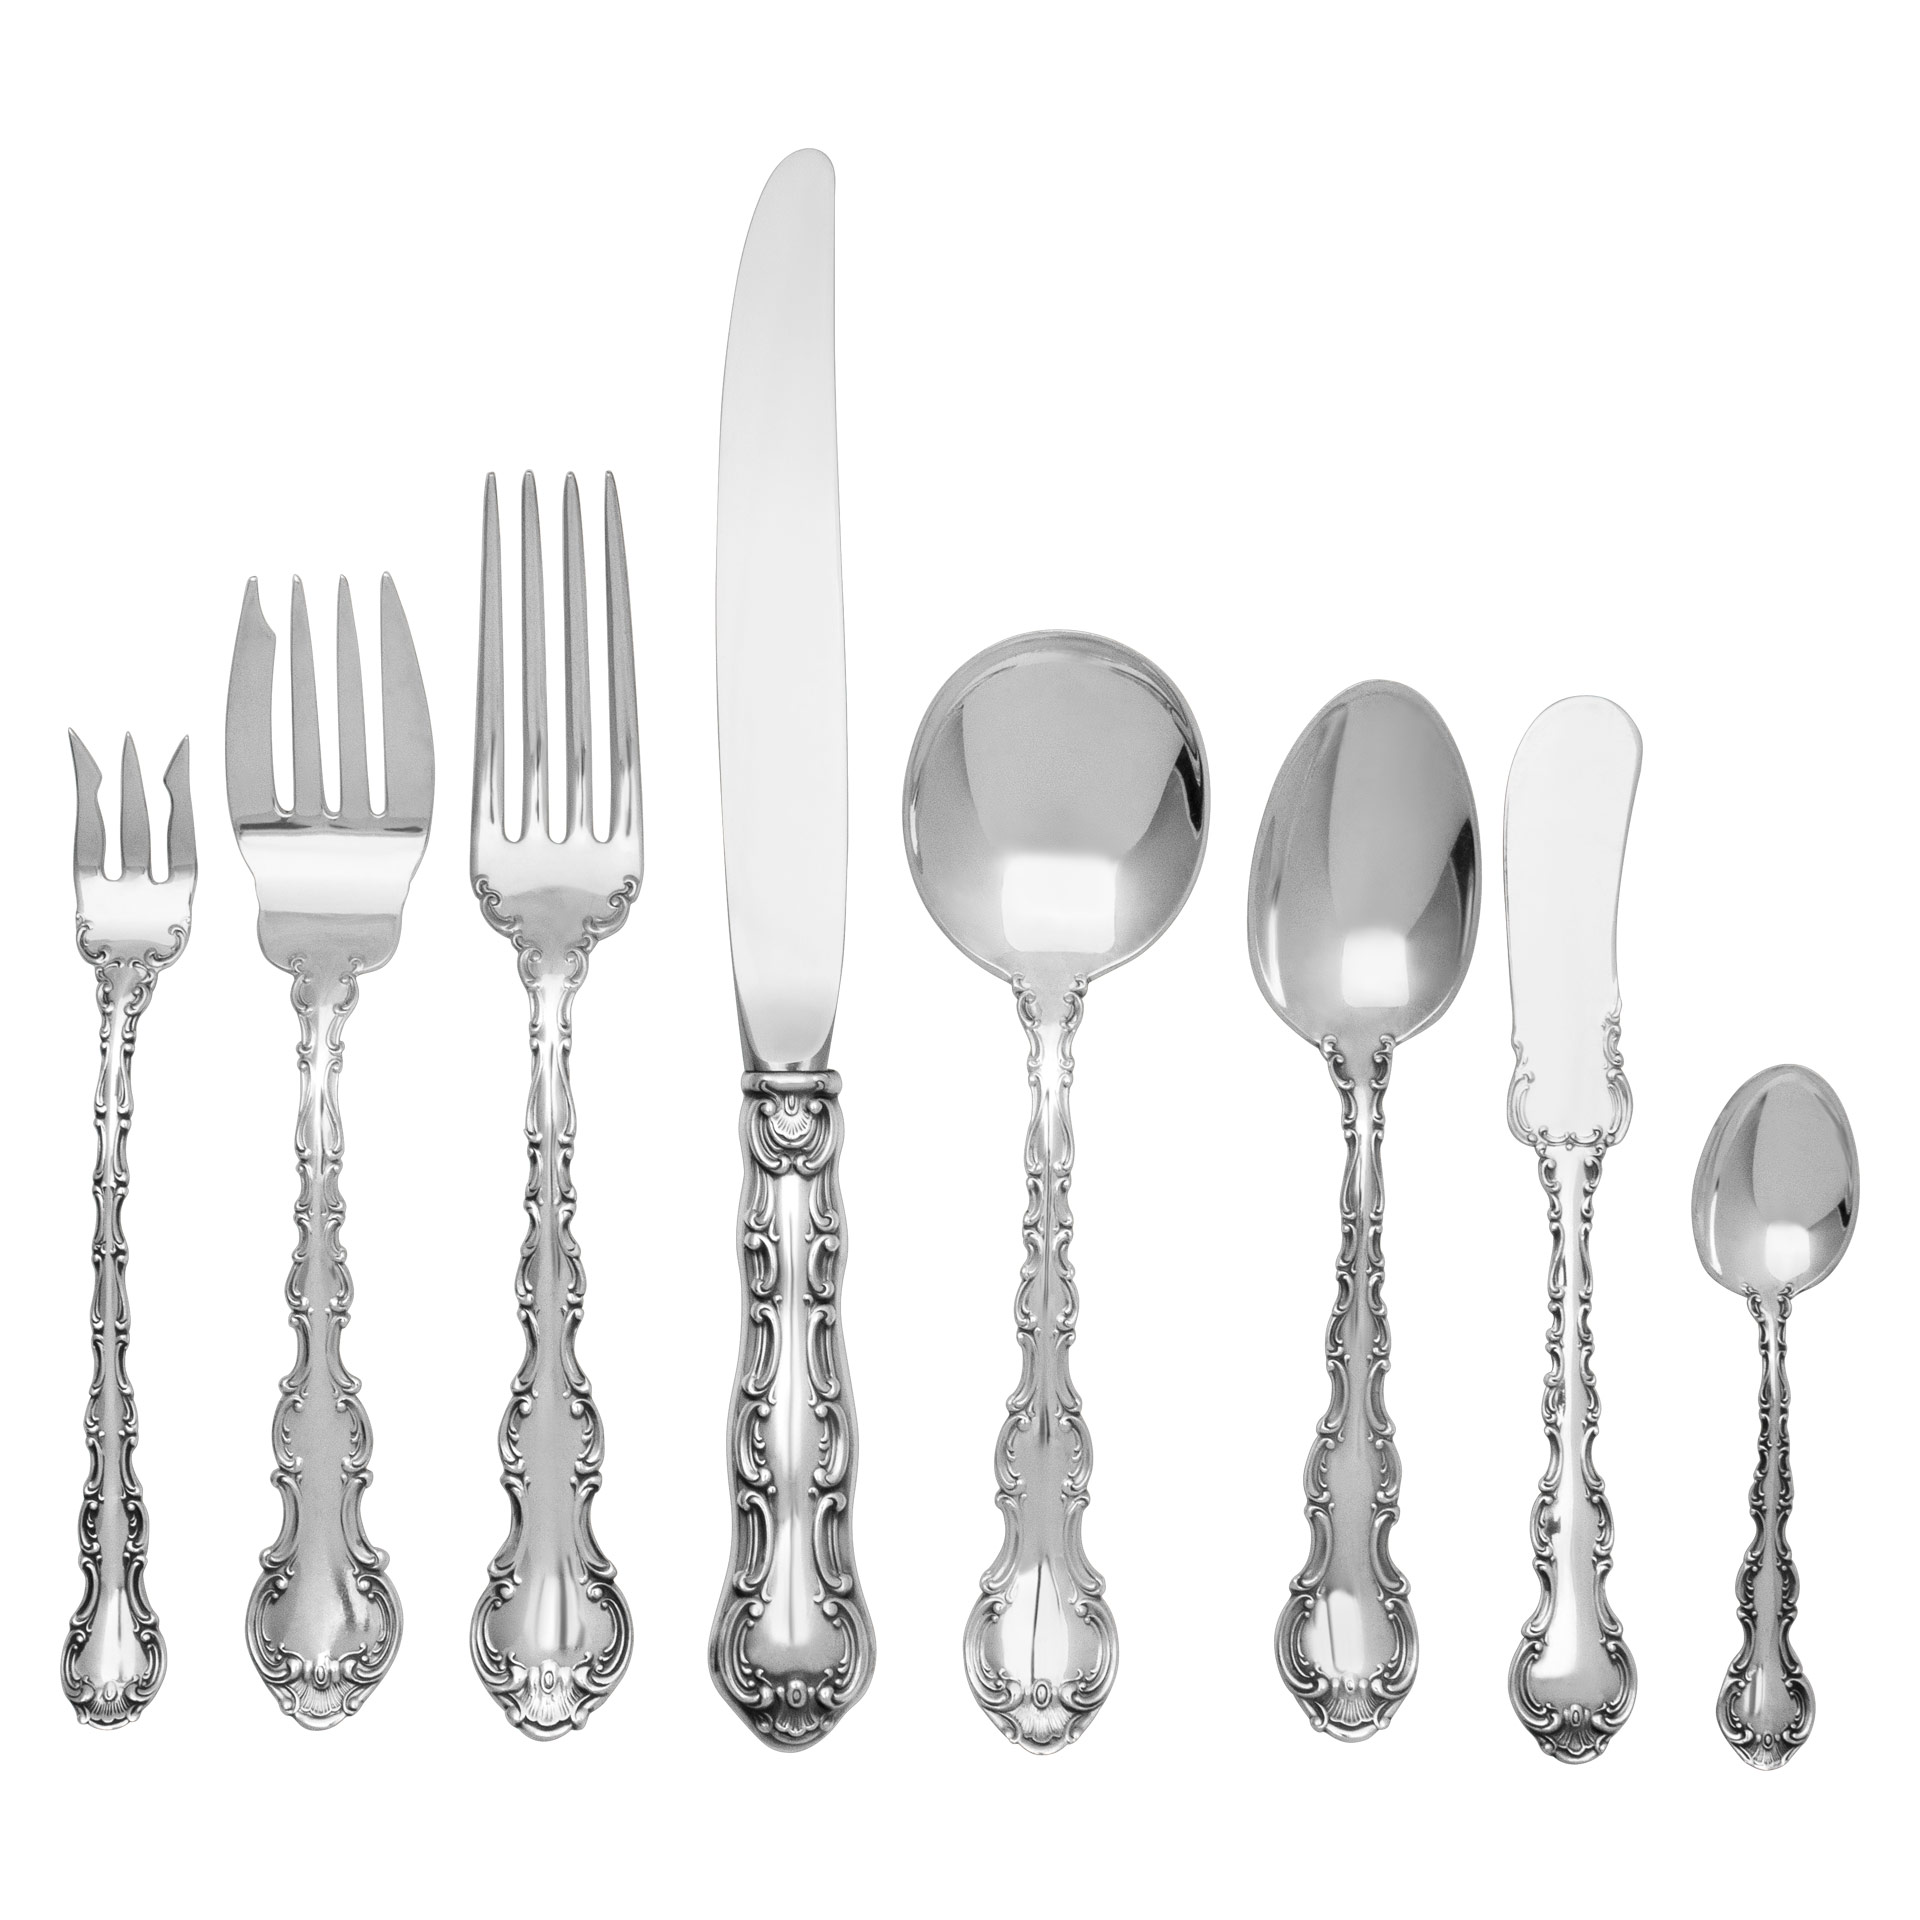 SUPER SIZED "Strasbourg" Sterling Silver Flatware set patented by Gorham in  1897-  8 Place setting for 12 (plus) with 18 serving pieces- Over 3300 grams sterling silver. image 1